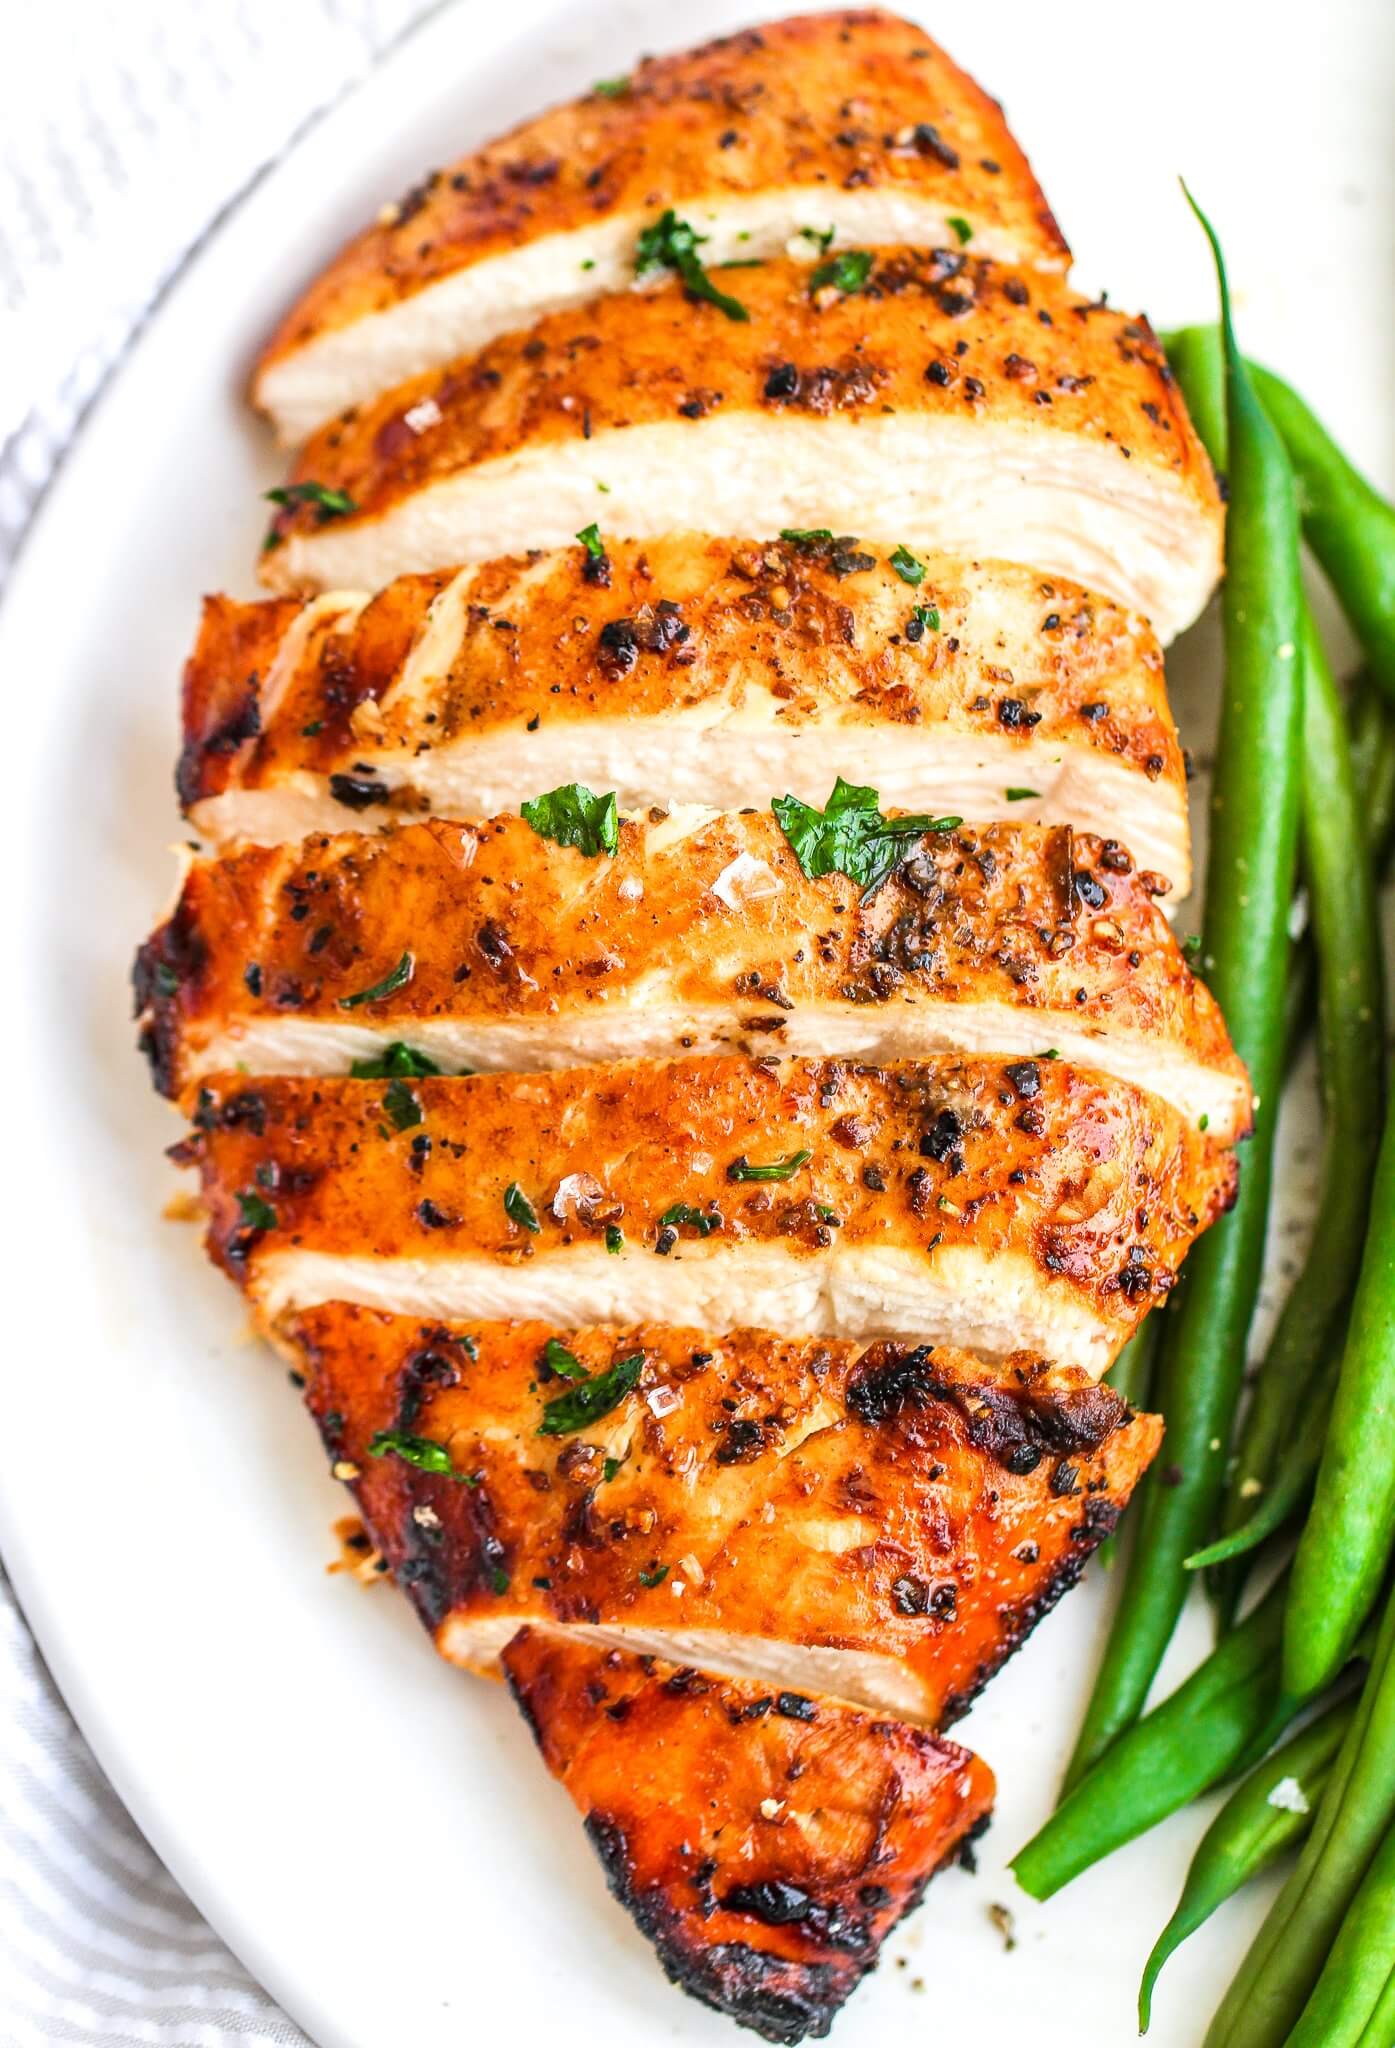 Close up of sliced chicken breast with seasonings and green beans on side